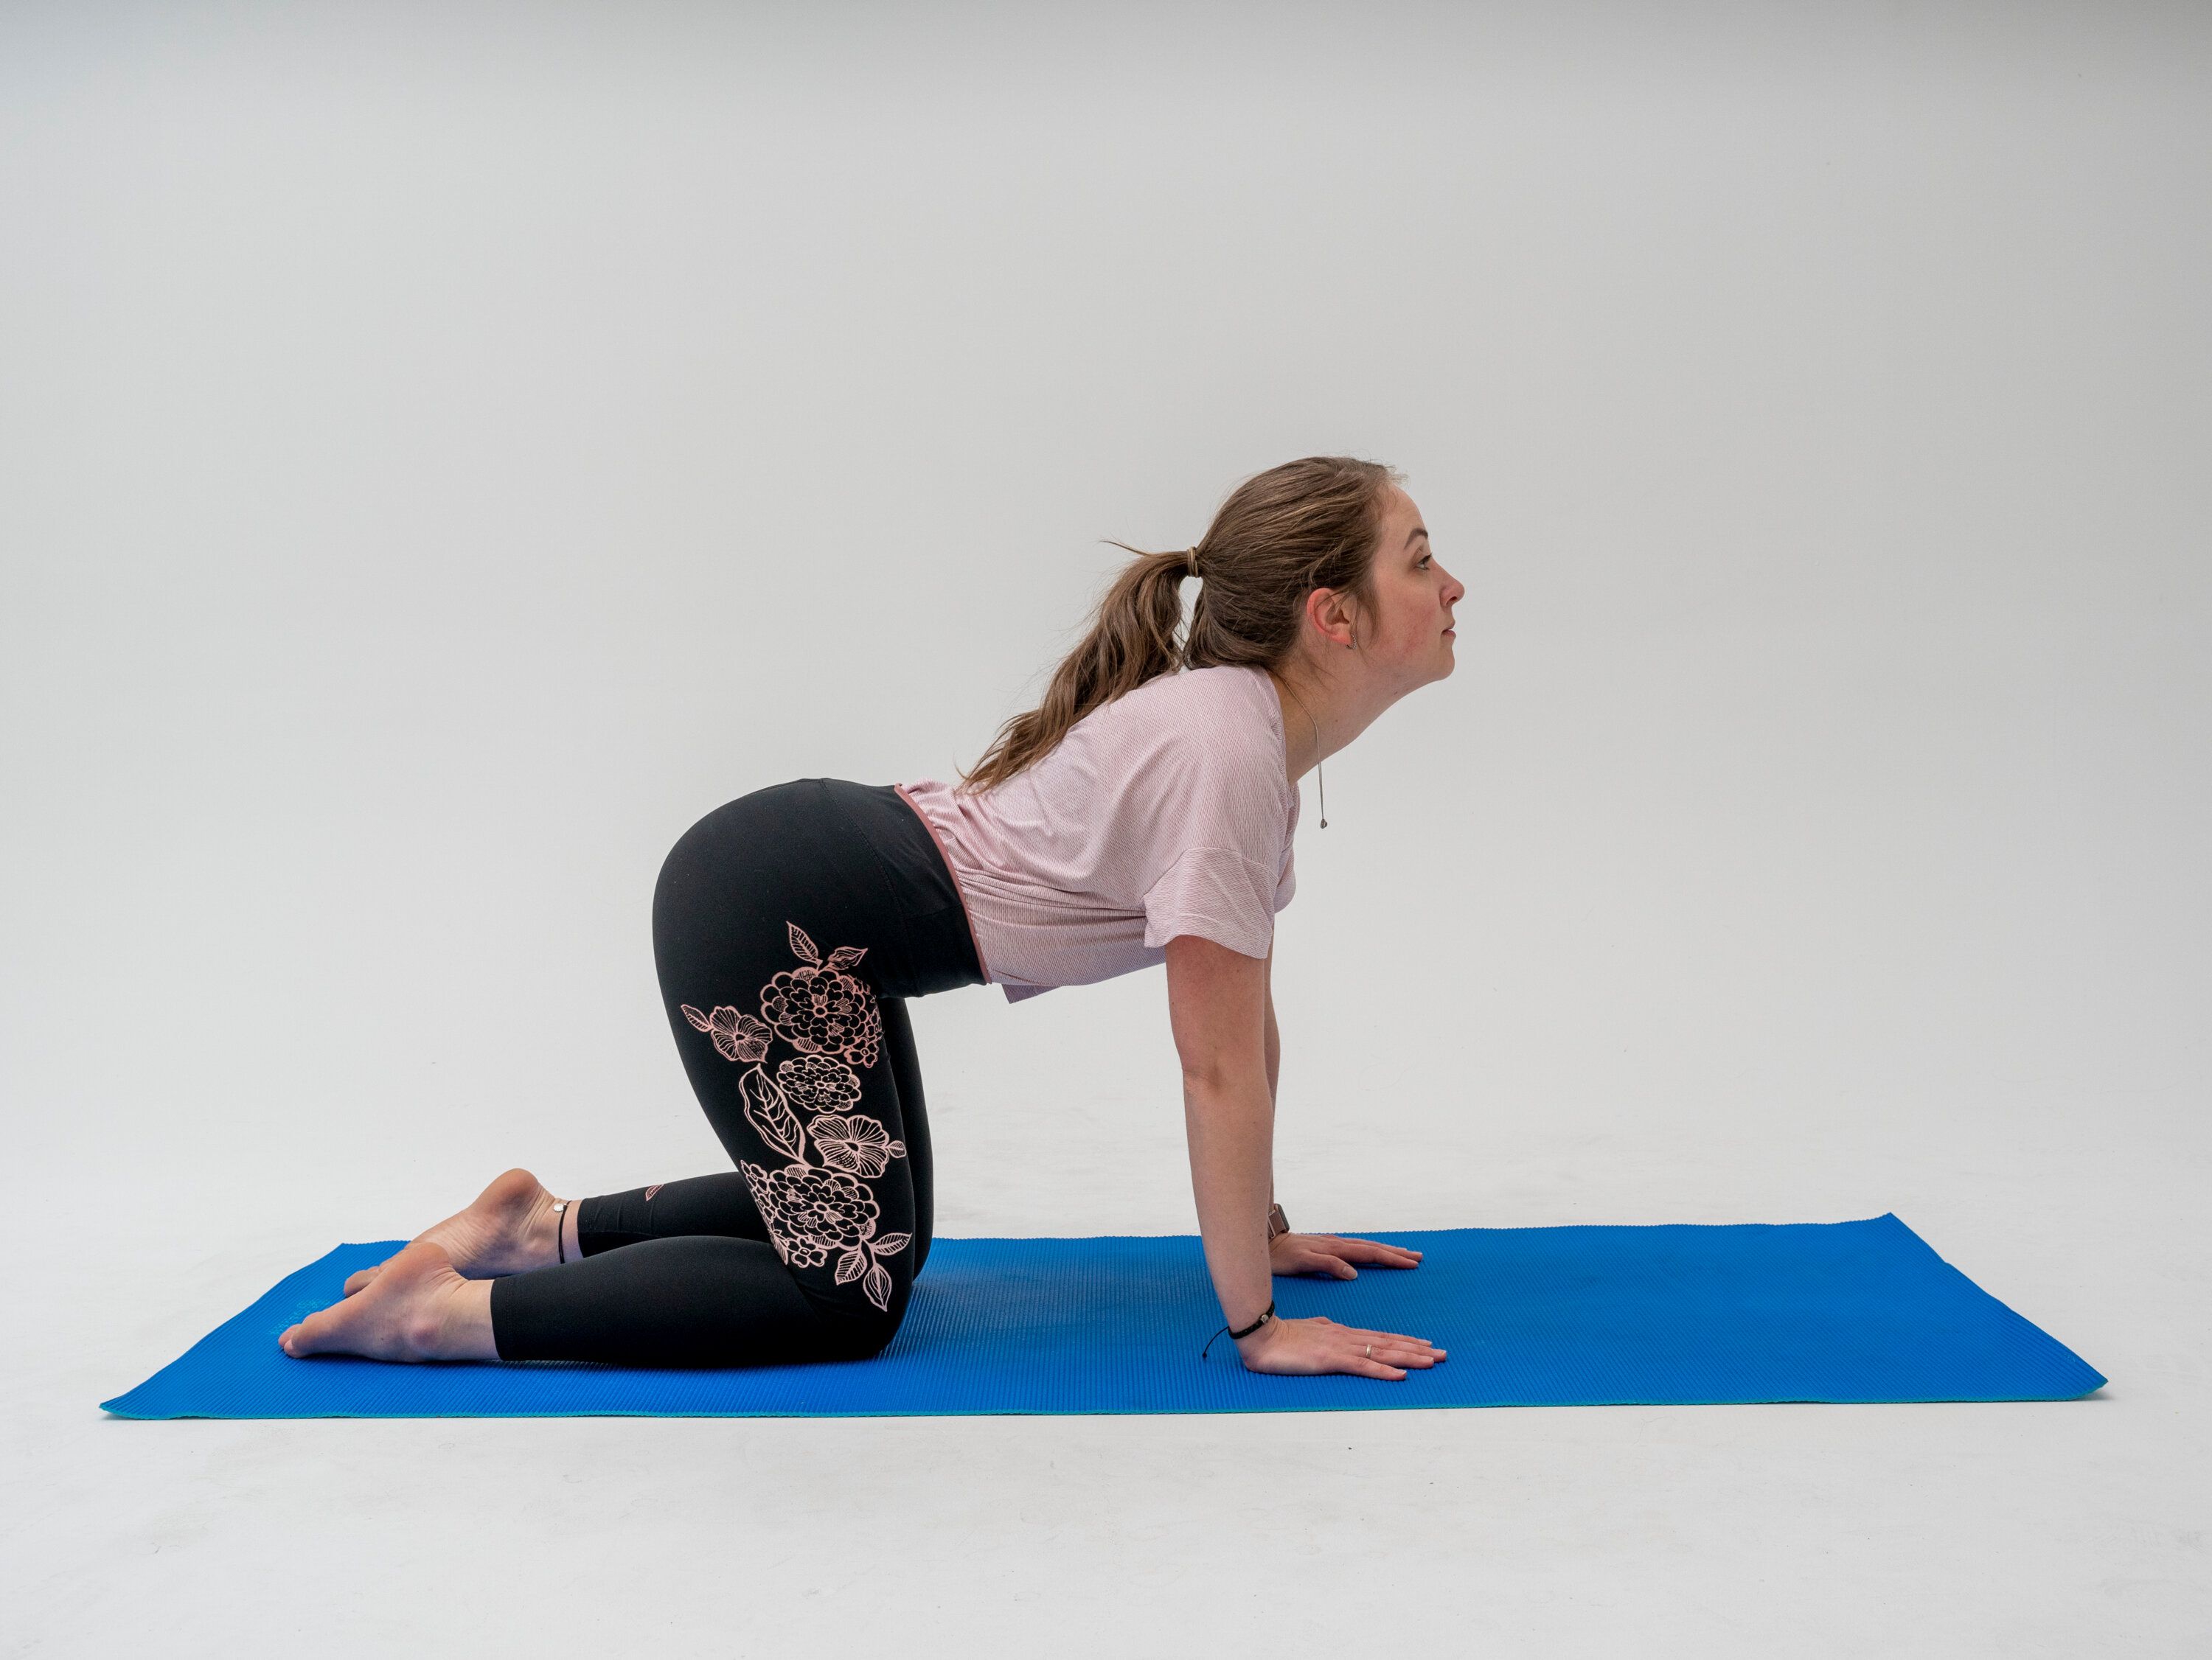 4 Yoga Poses That Will Fix Your Hip and Back Pain | SELF